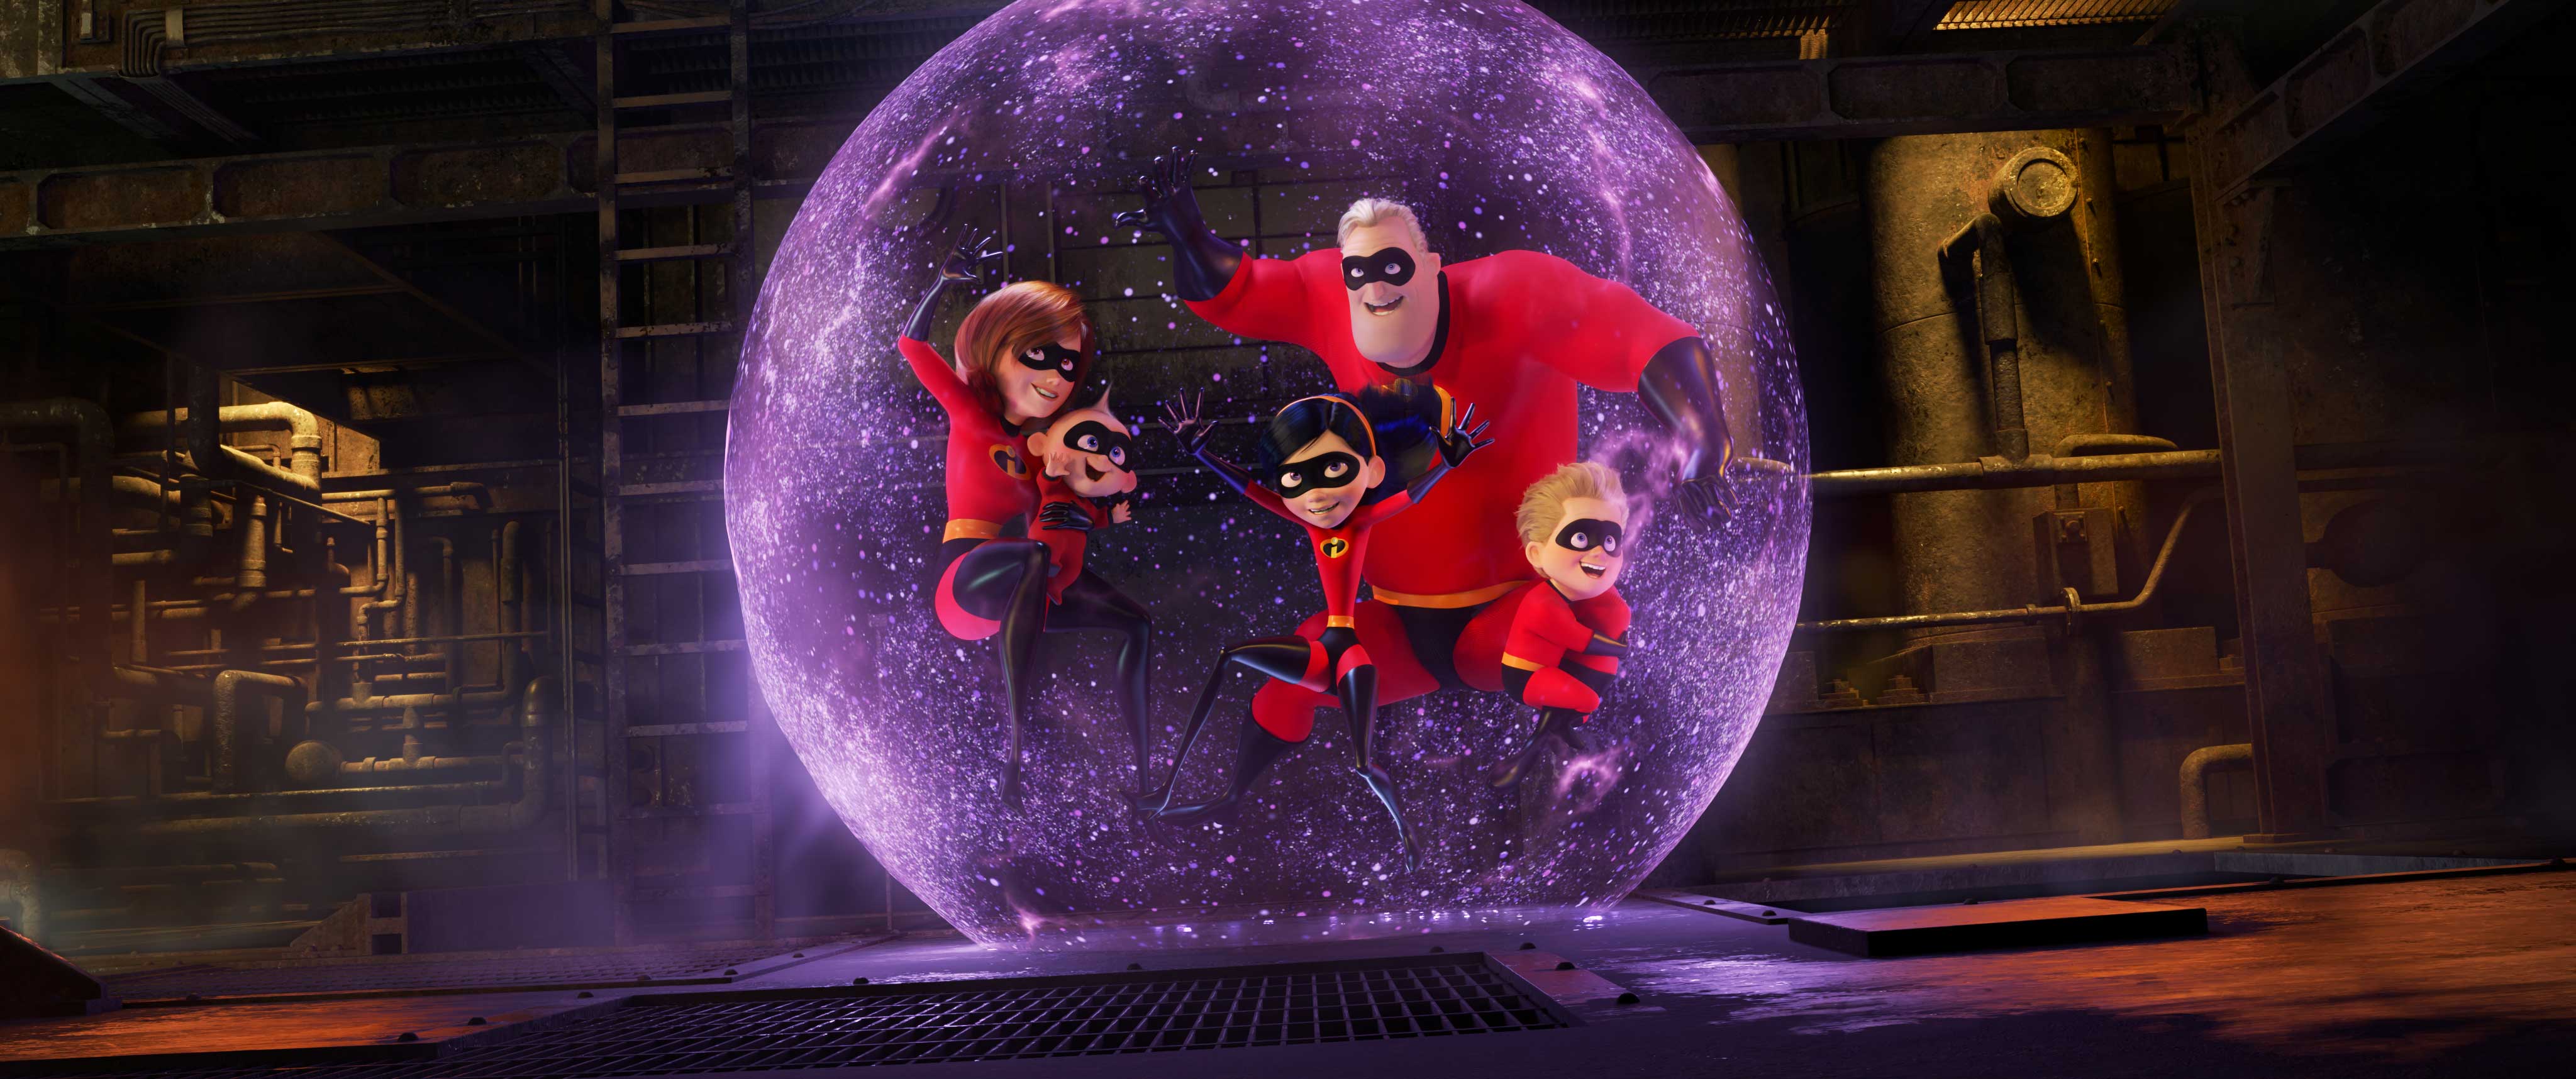 New Incredibles 2 Trailer Debuts Today The Walt Disney Company